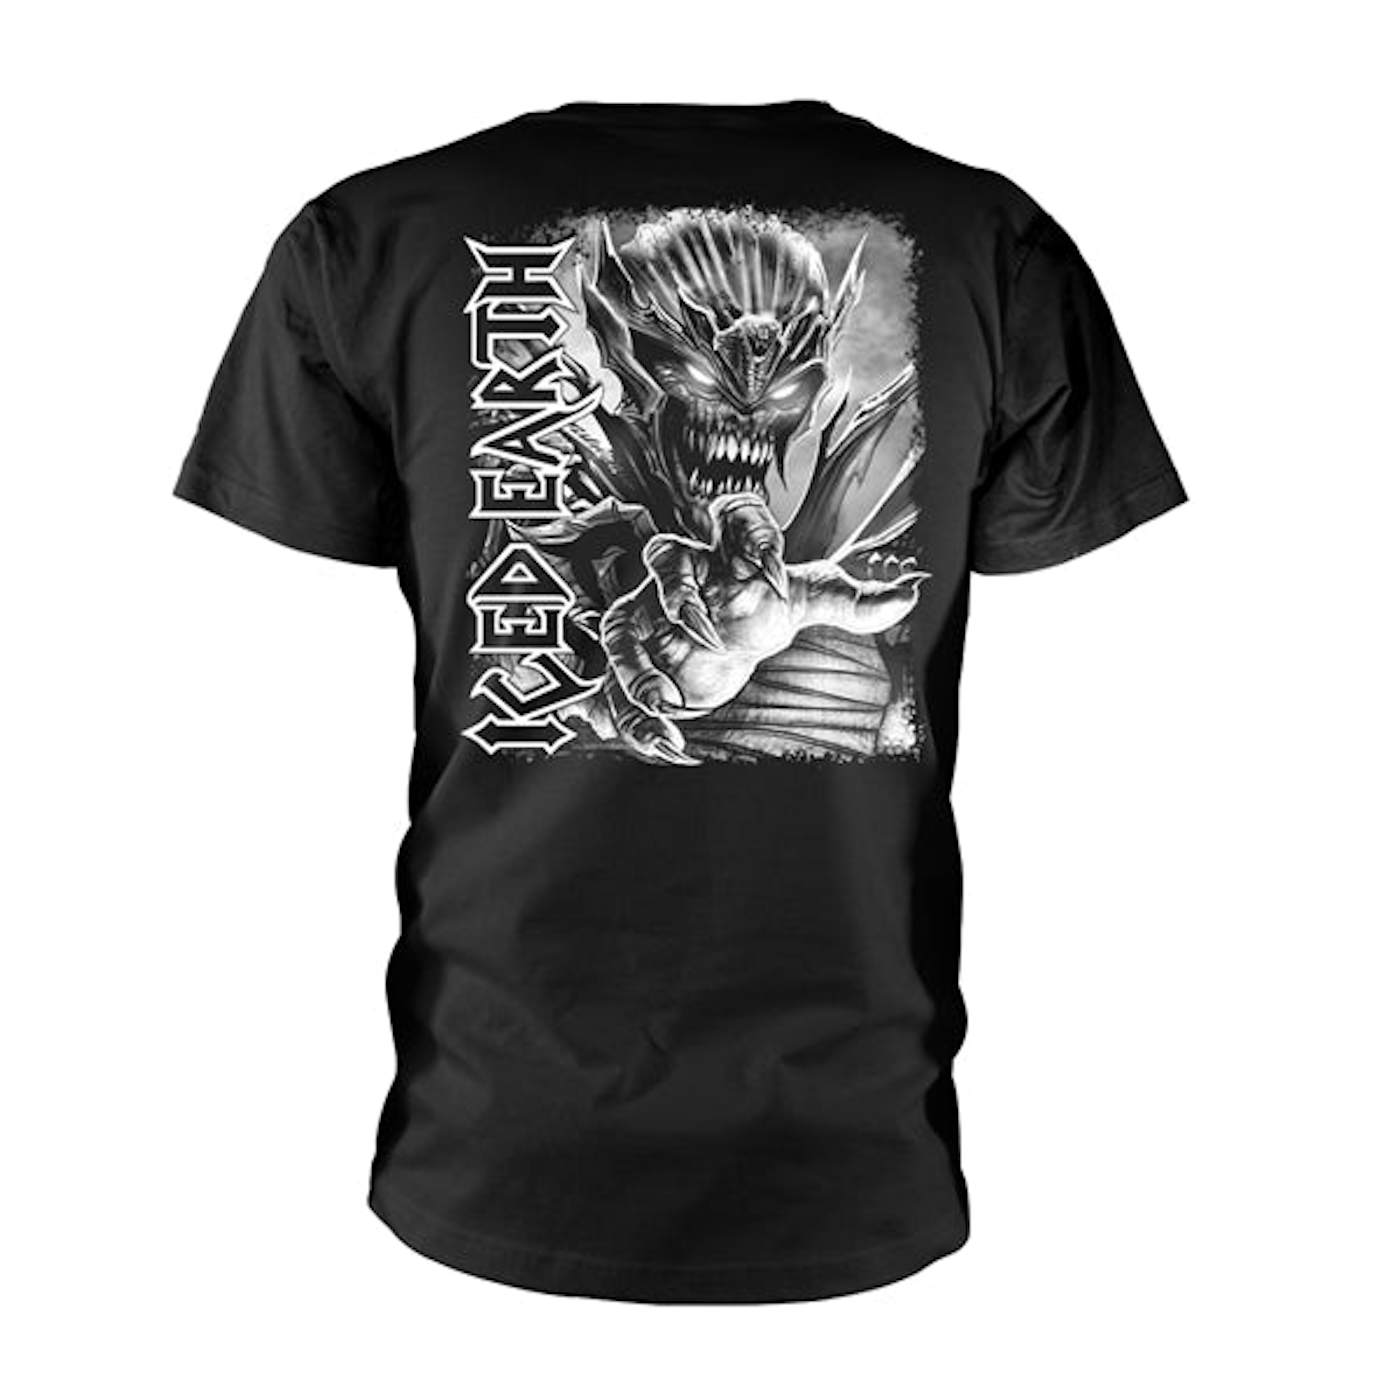 Iced Earth T Shirt - Dystopia